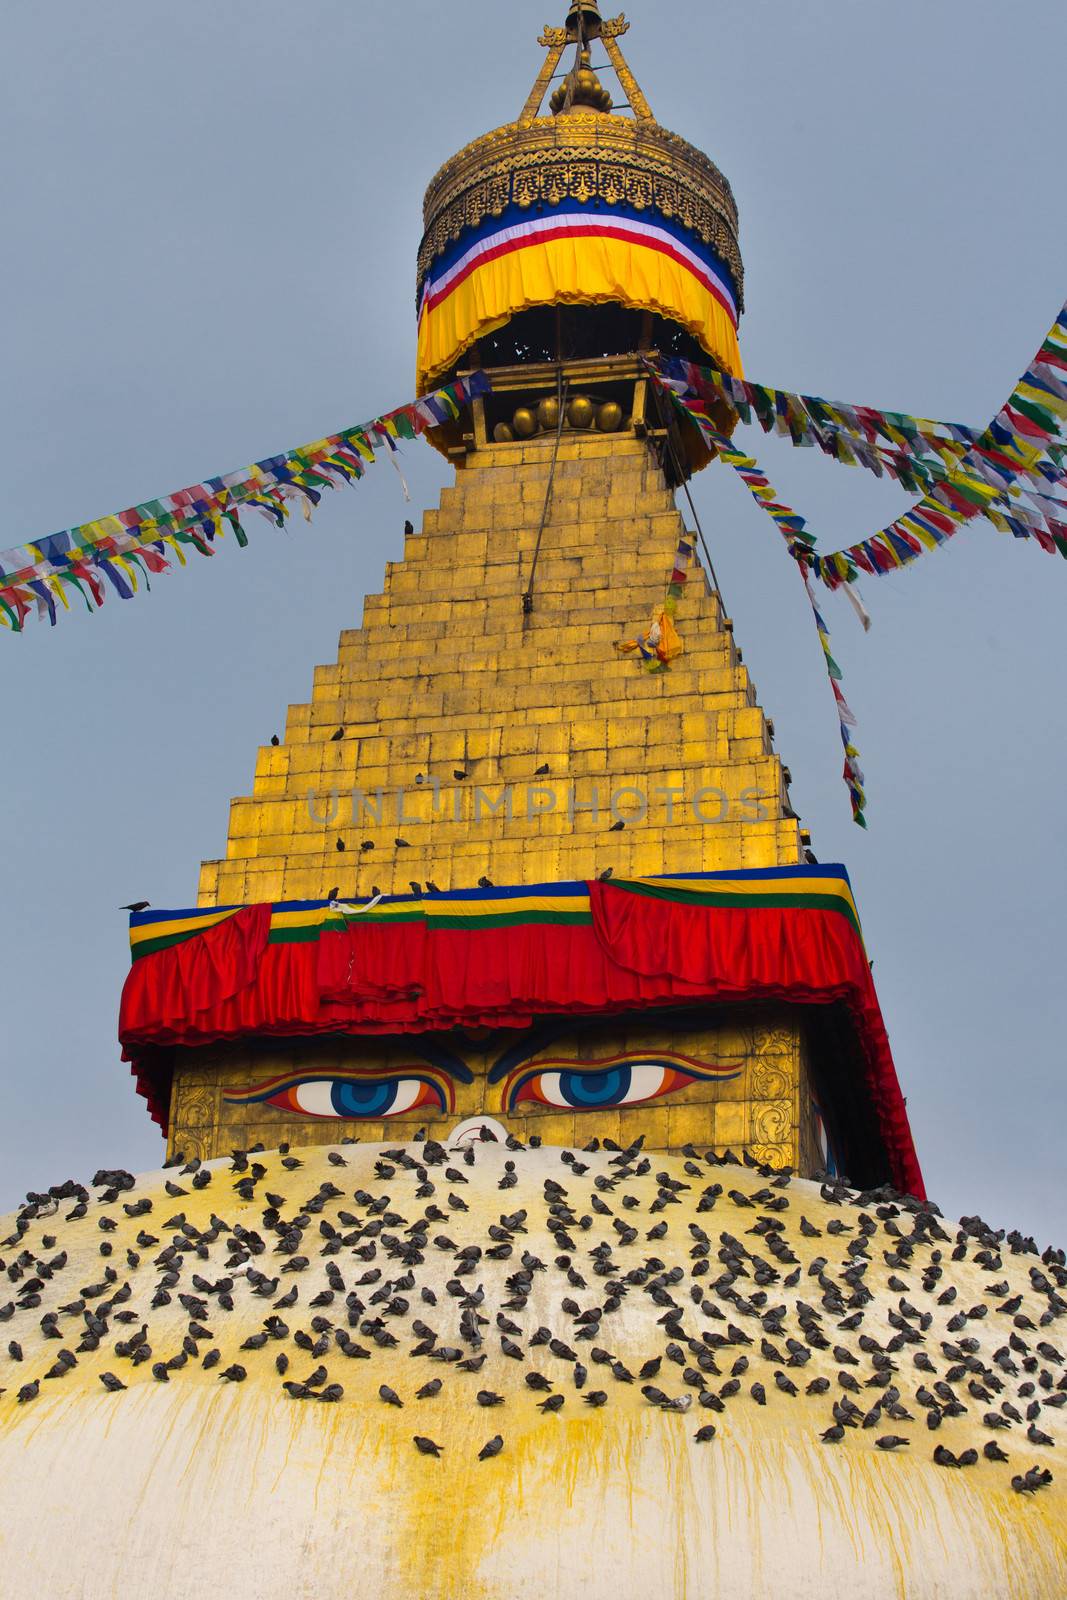 Boudhanath Stupa, one of the main landmark in Kathmandu surrounded by birds early in the morning, Nepal